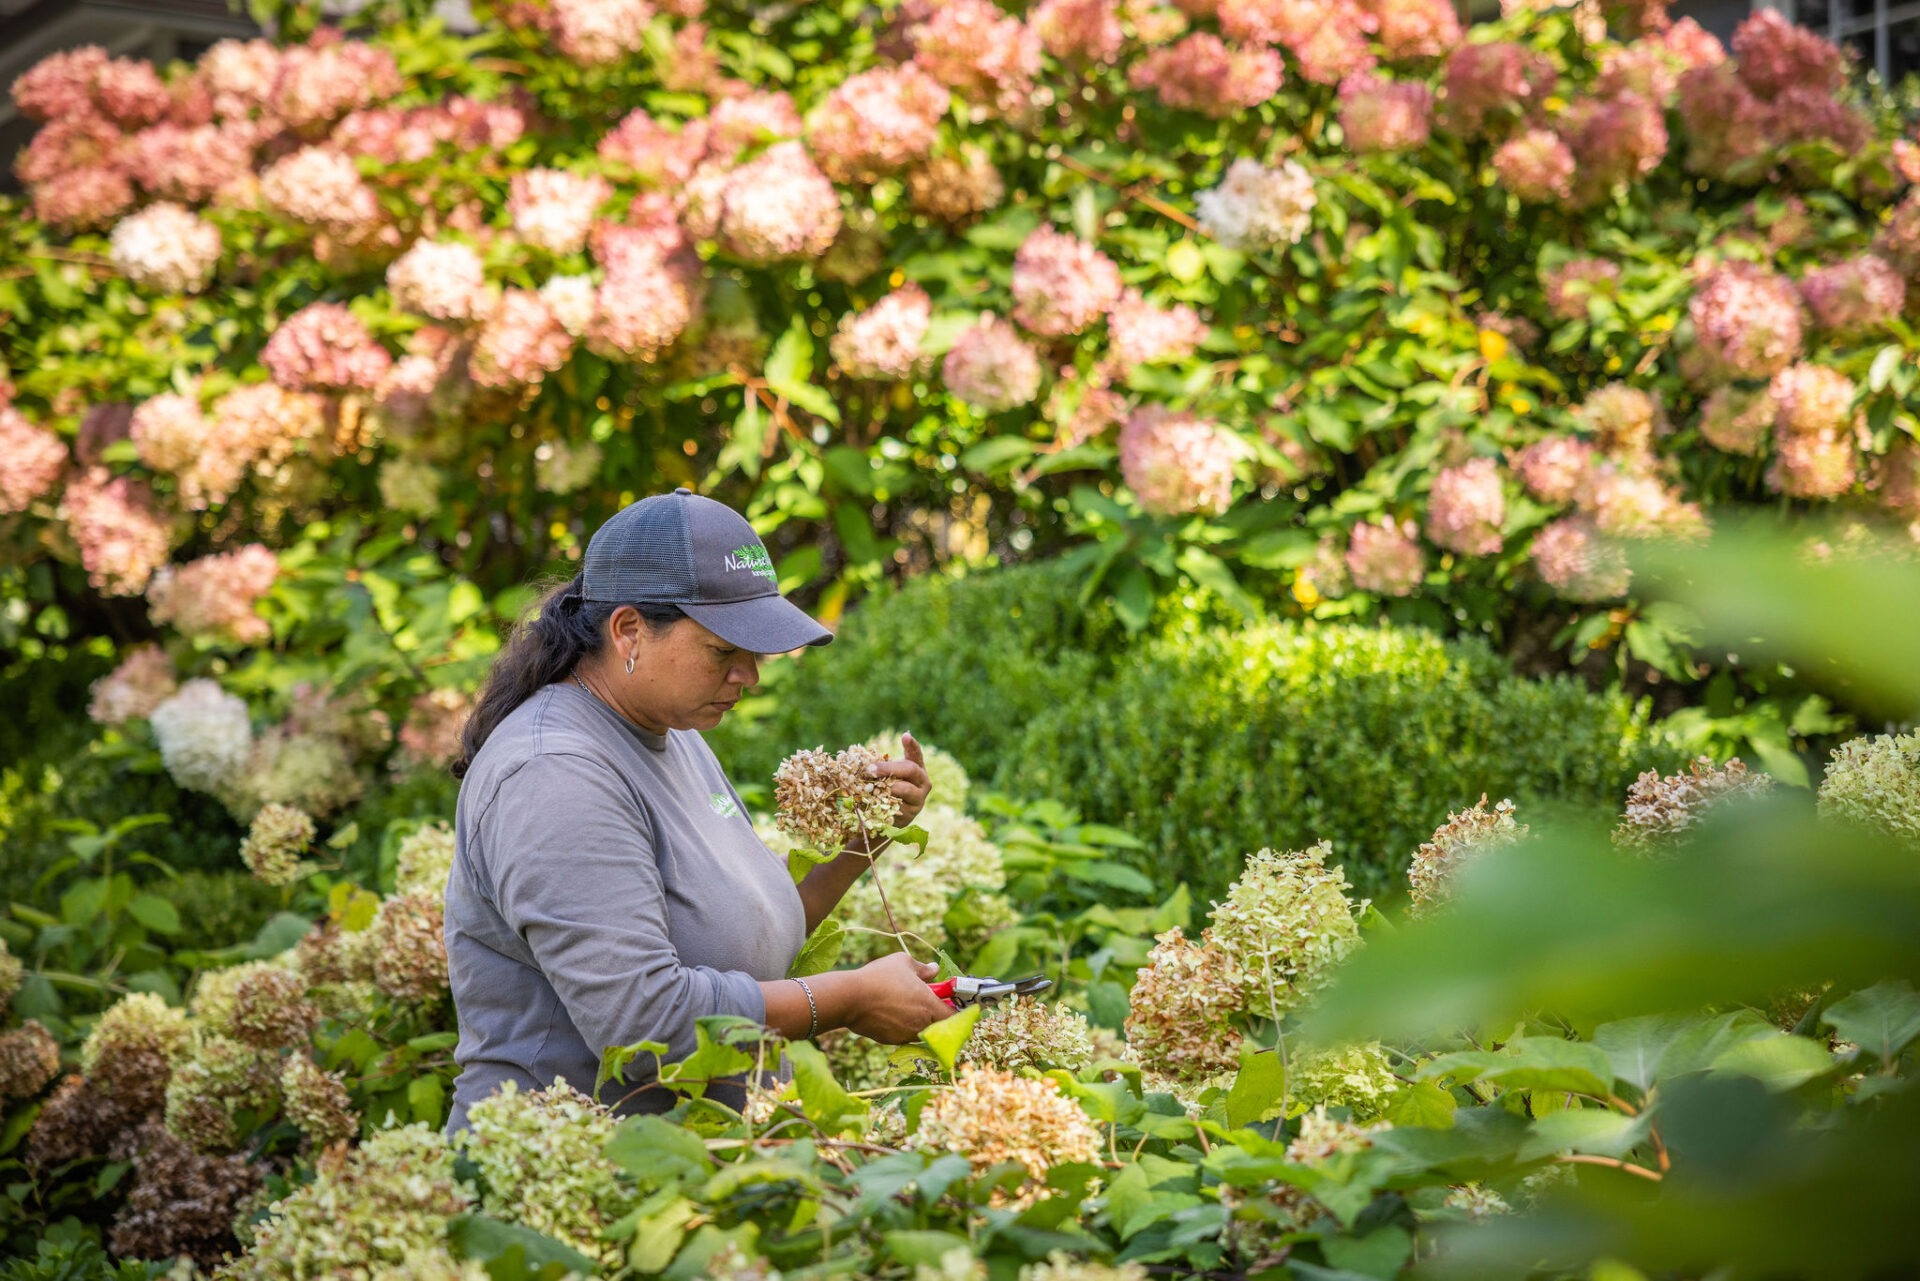 A person is trimming plants in a lush garden filled with blooming hydrangeas, wearing casual work attire and a cap, surrounded by green foliage.